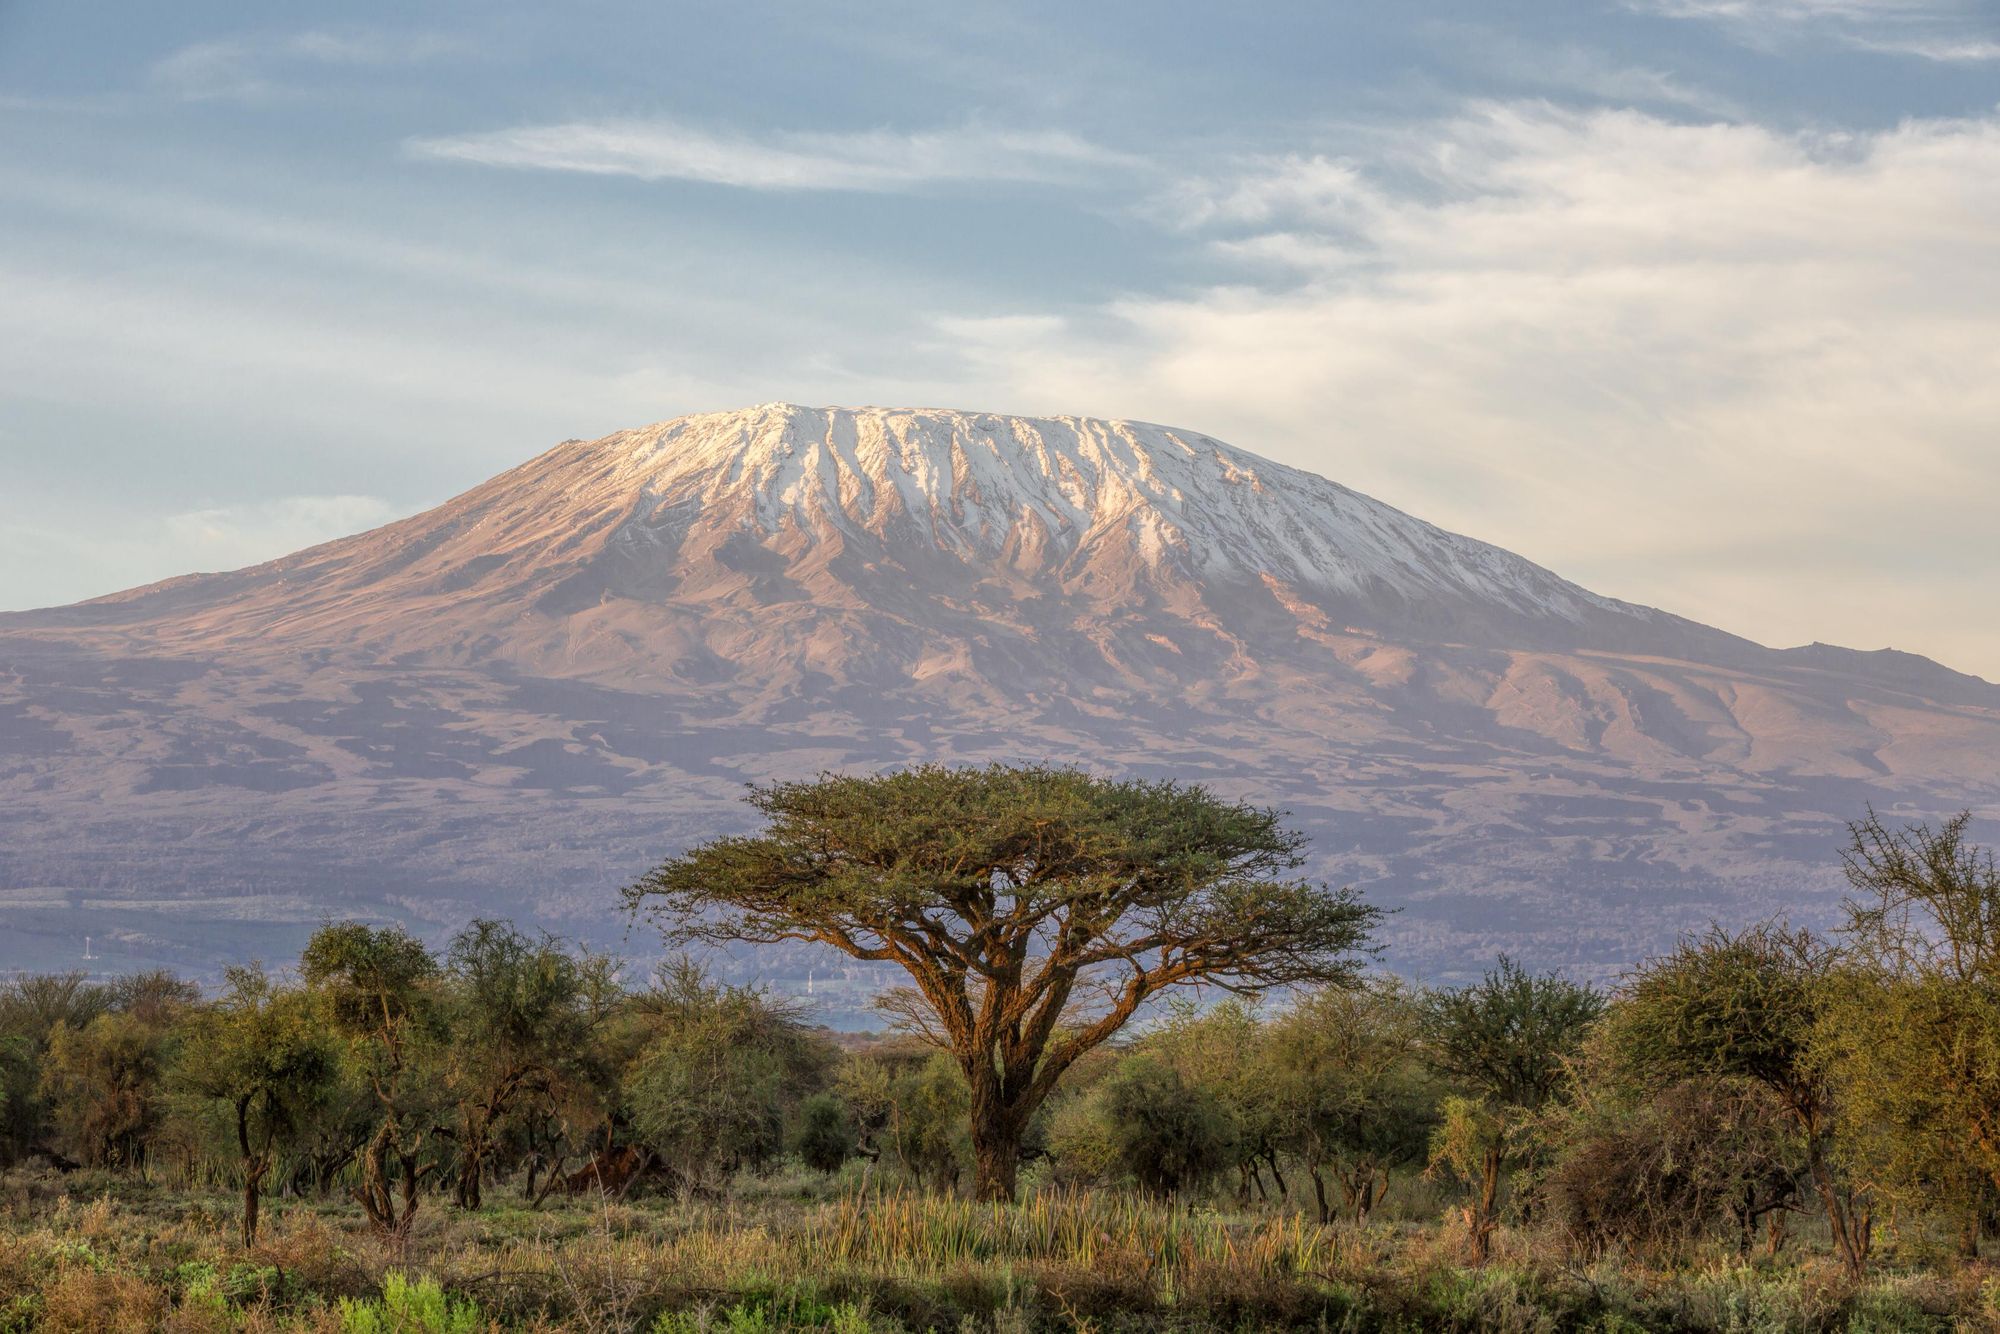 There are few mountain outlines more famous than that of Mount Kilimanjaro, the highest point in Africa. Photo: Getty